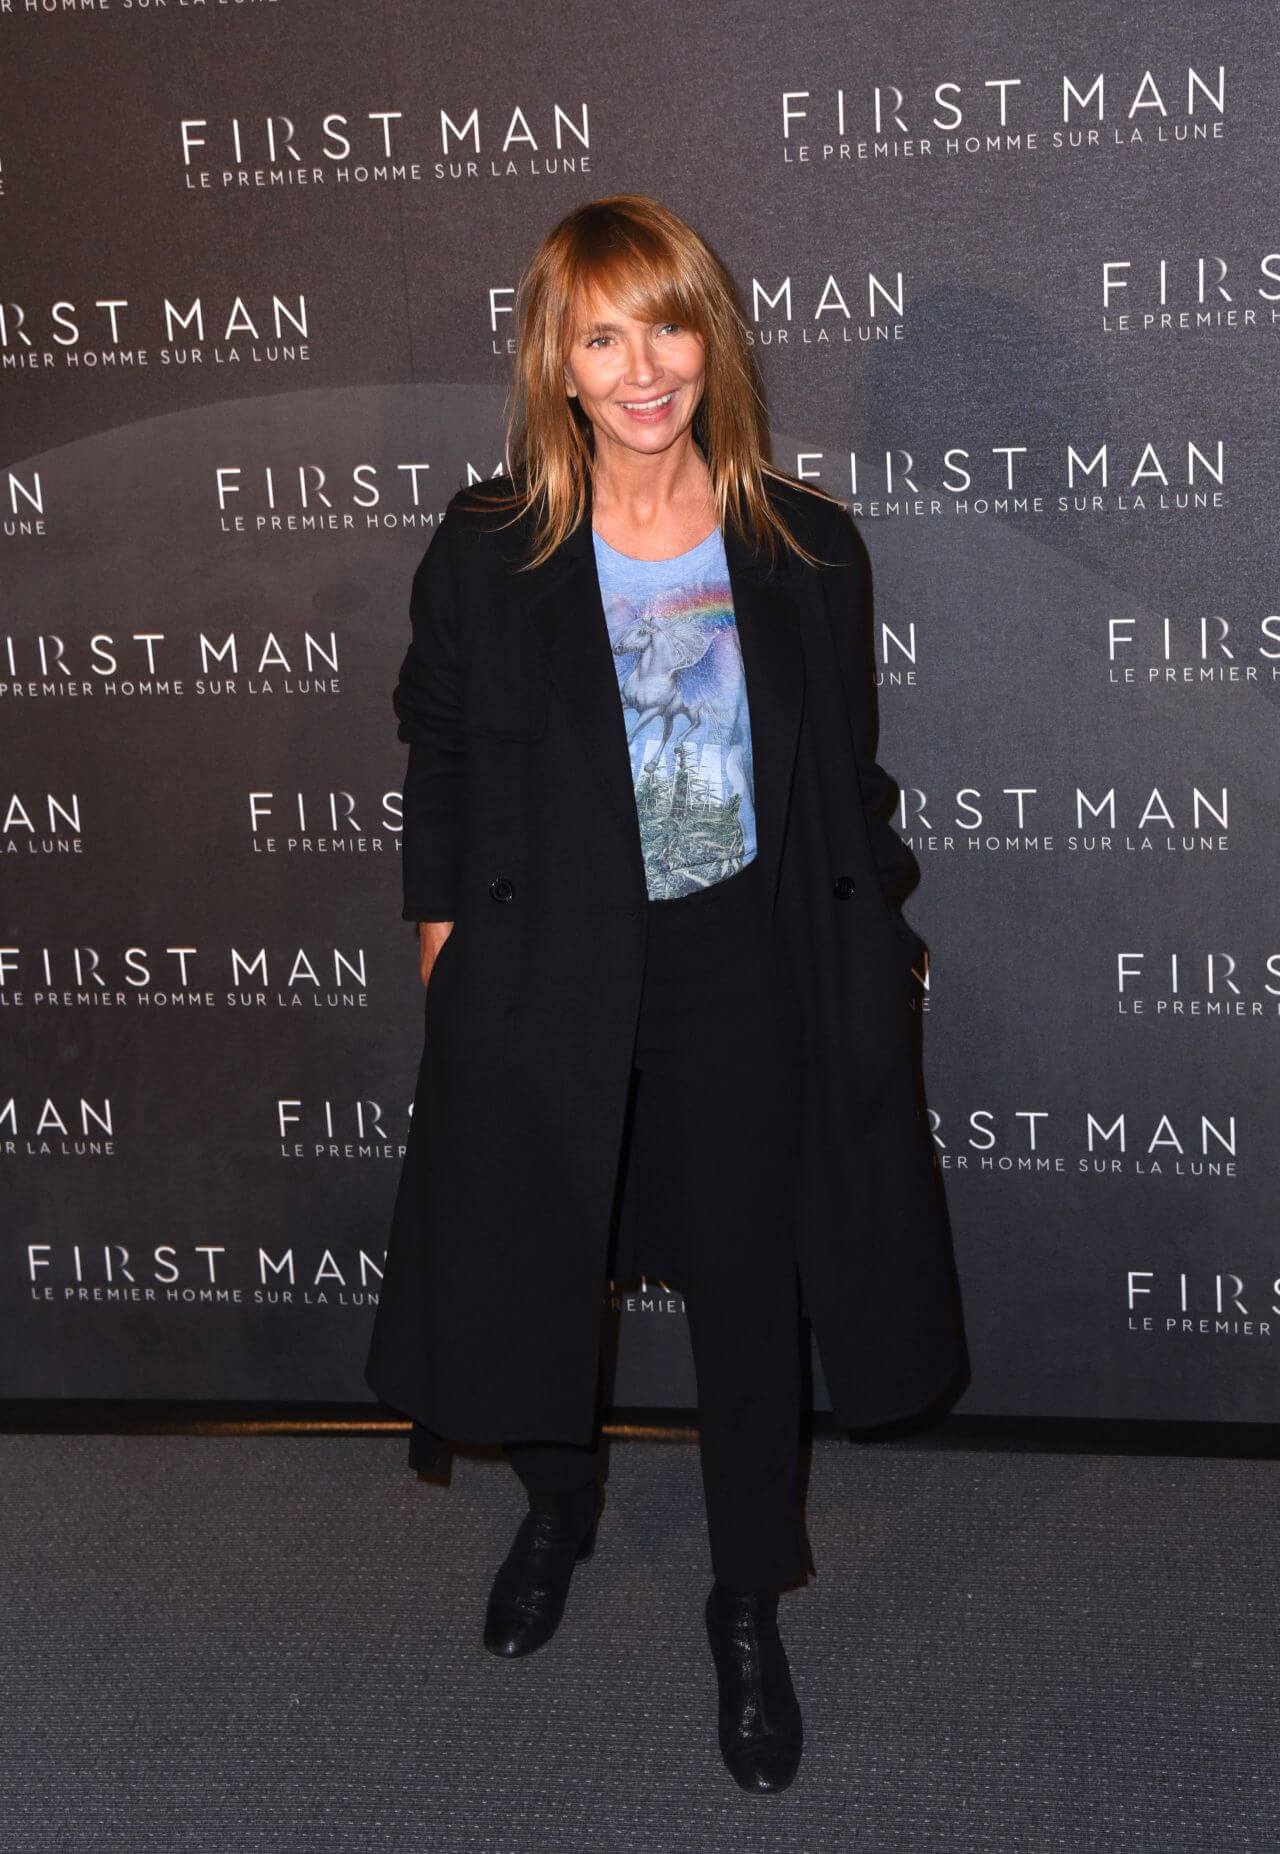 Axelle Laffont  In a Black Long Blazer Coat Under a Blue T-shirt With Pants At “First Man” Premiere in Paris